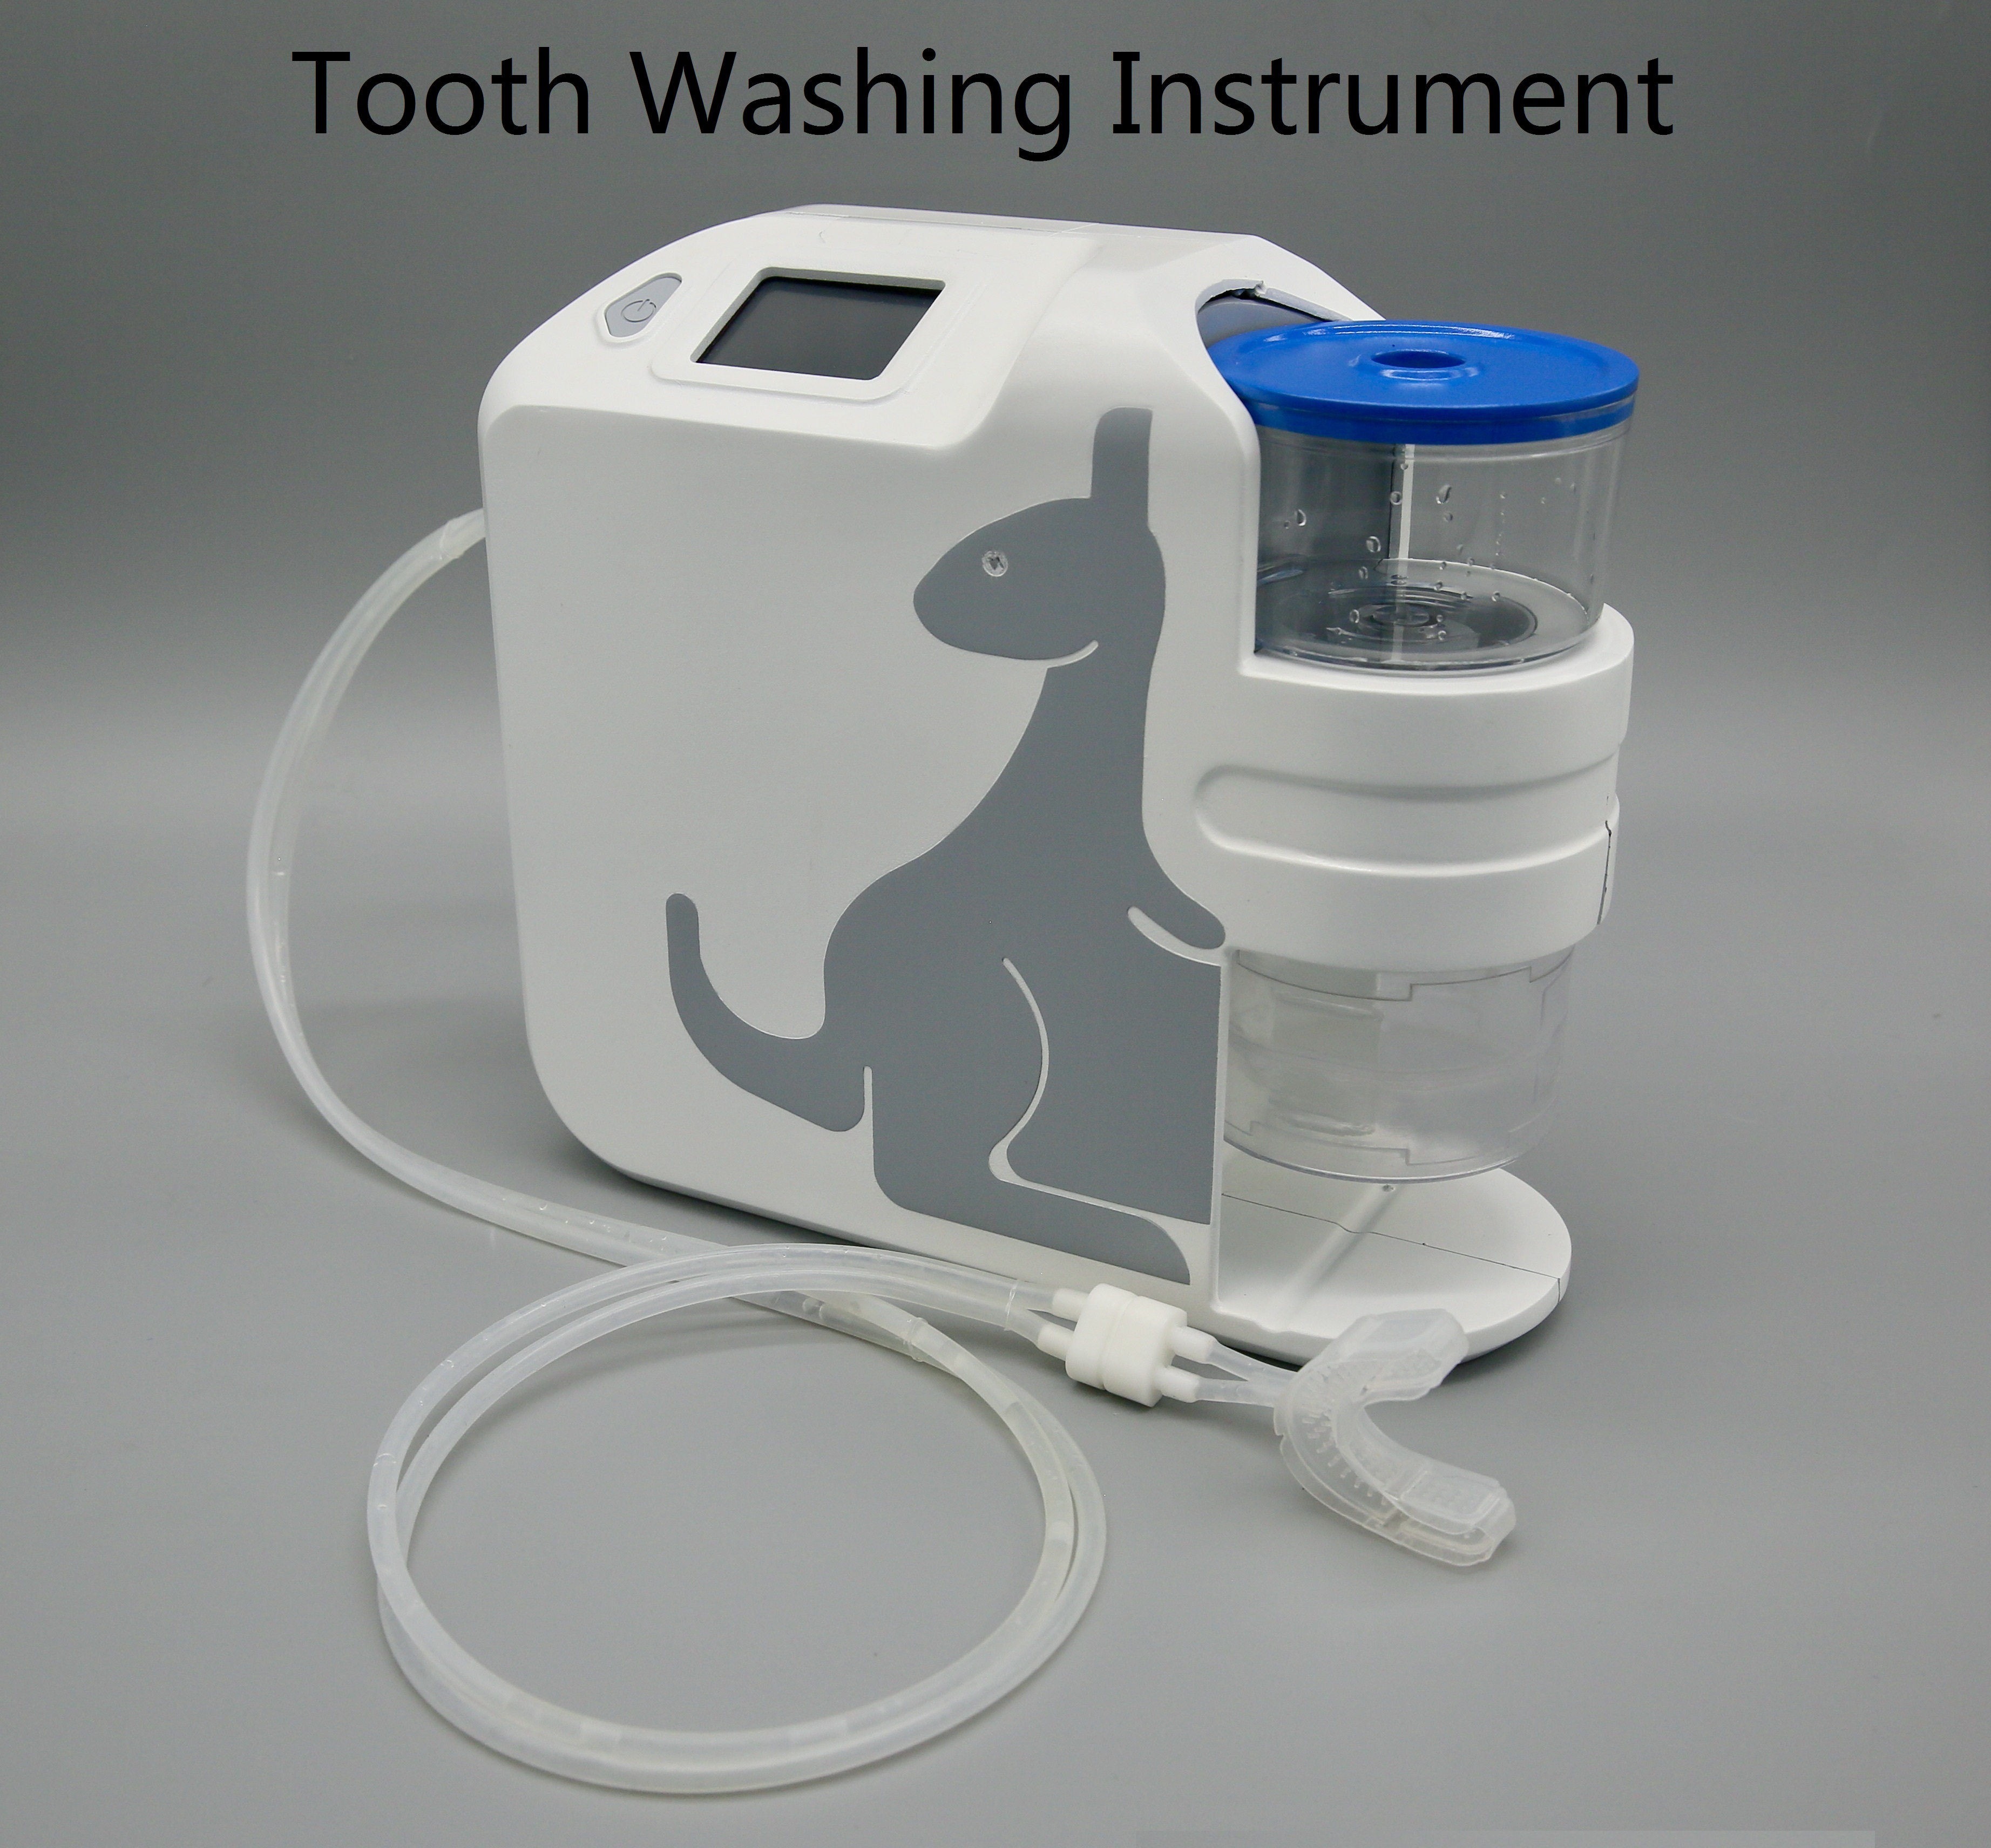 Tooth Washing Instrument